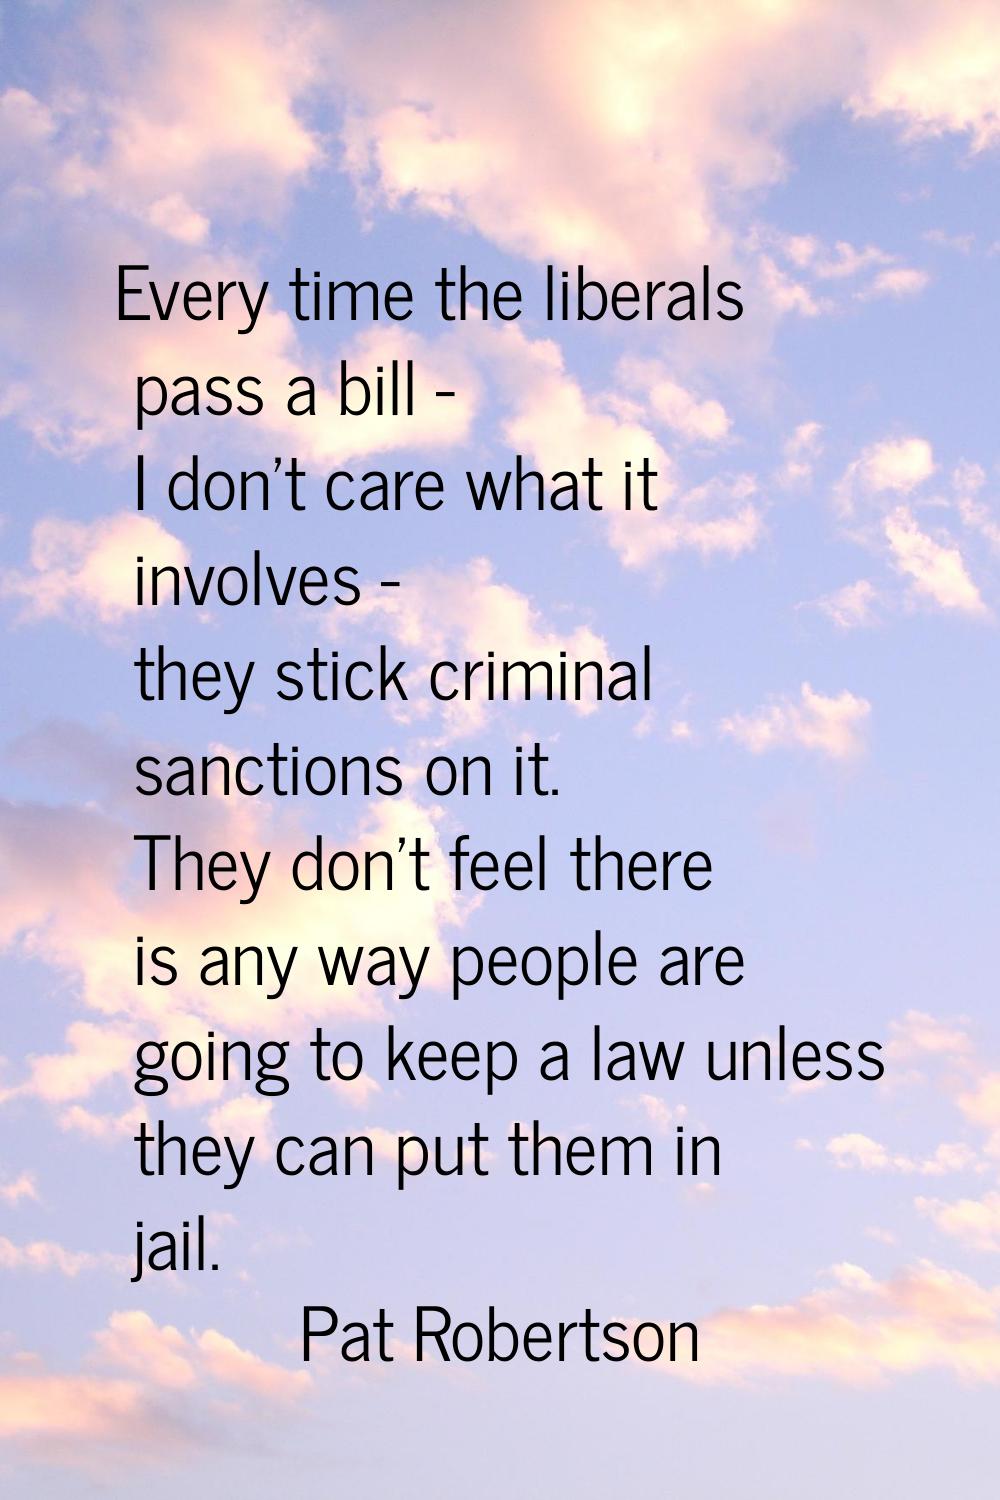 Every time the liberals pass a bill - I don't care what it involves - they stick criminal sanctions